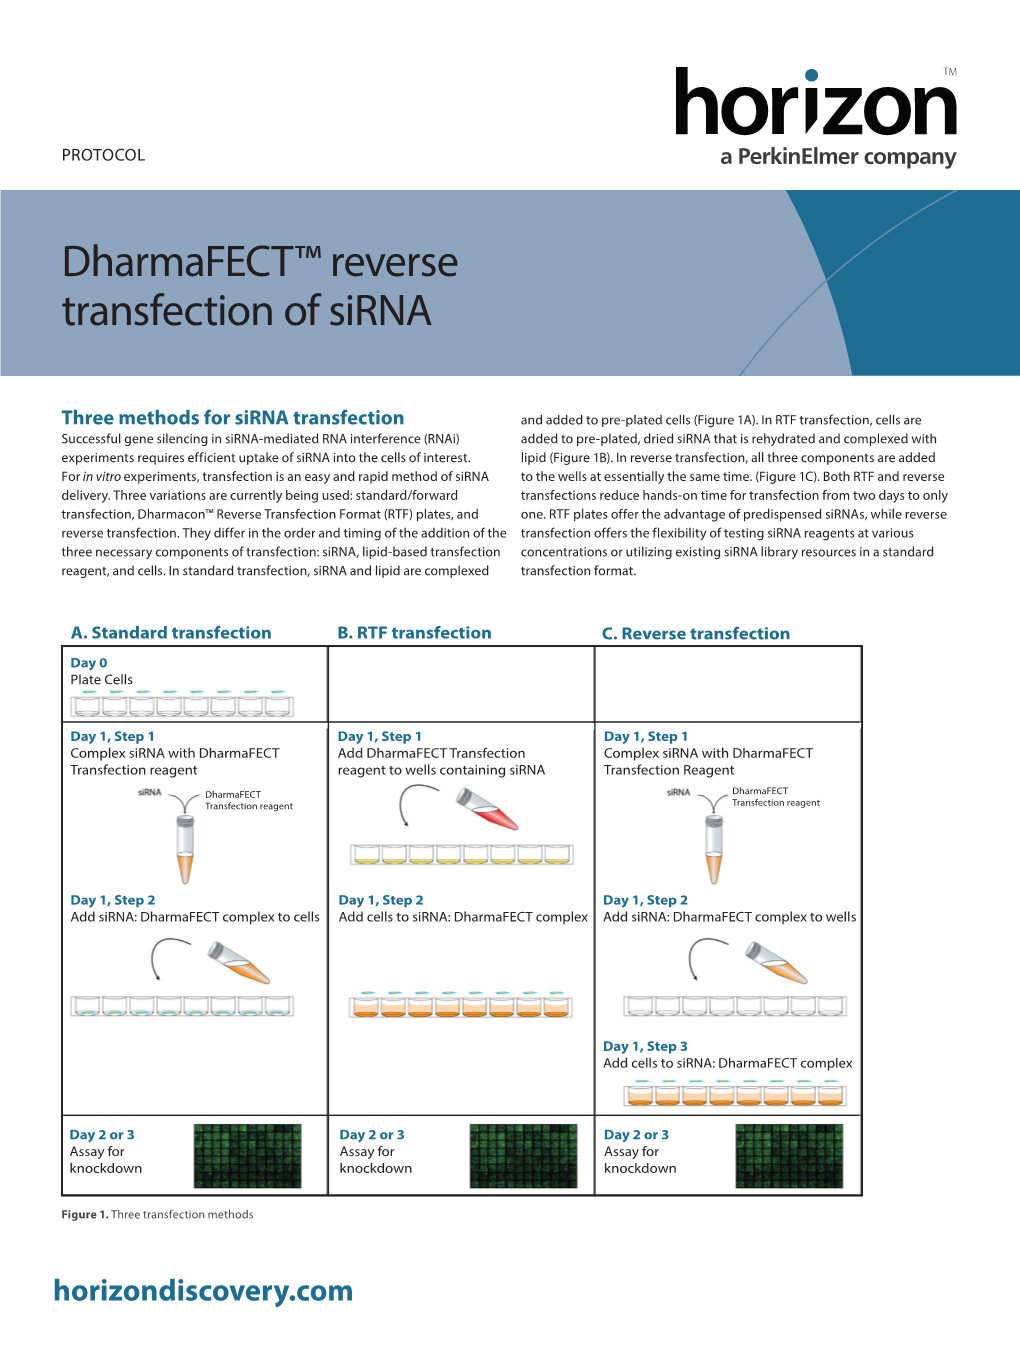 Reverse Transfection of Sirna